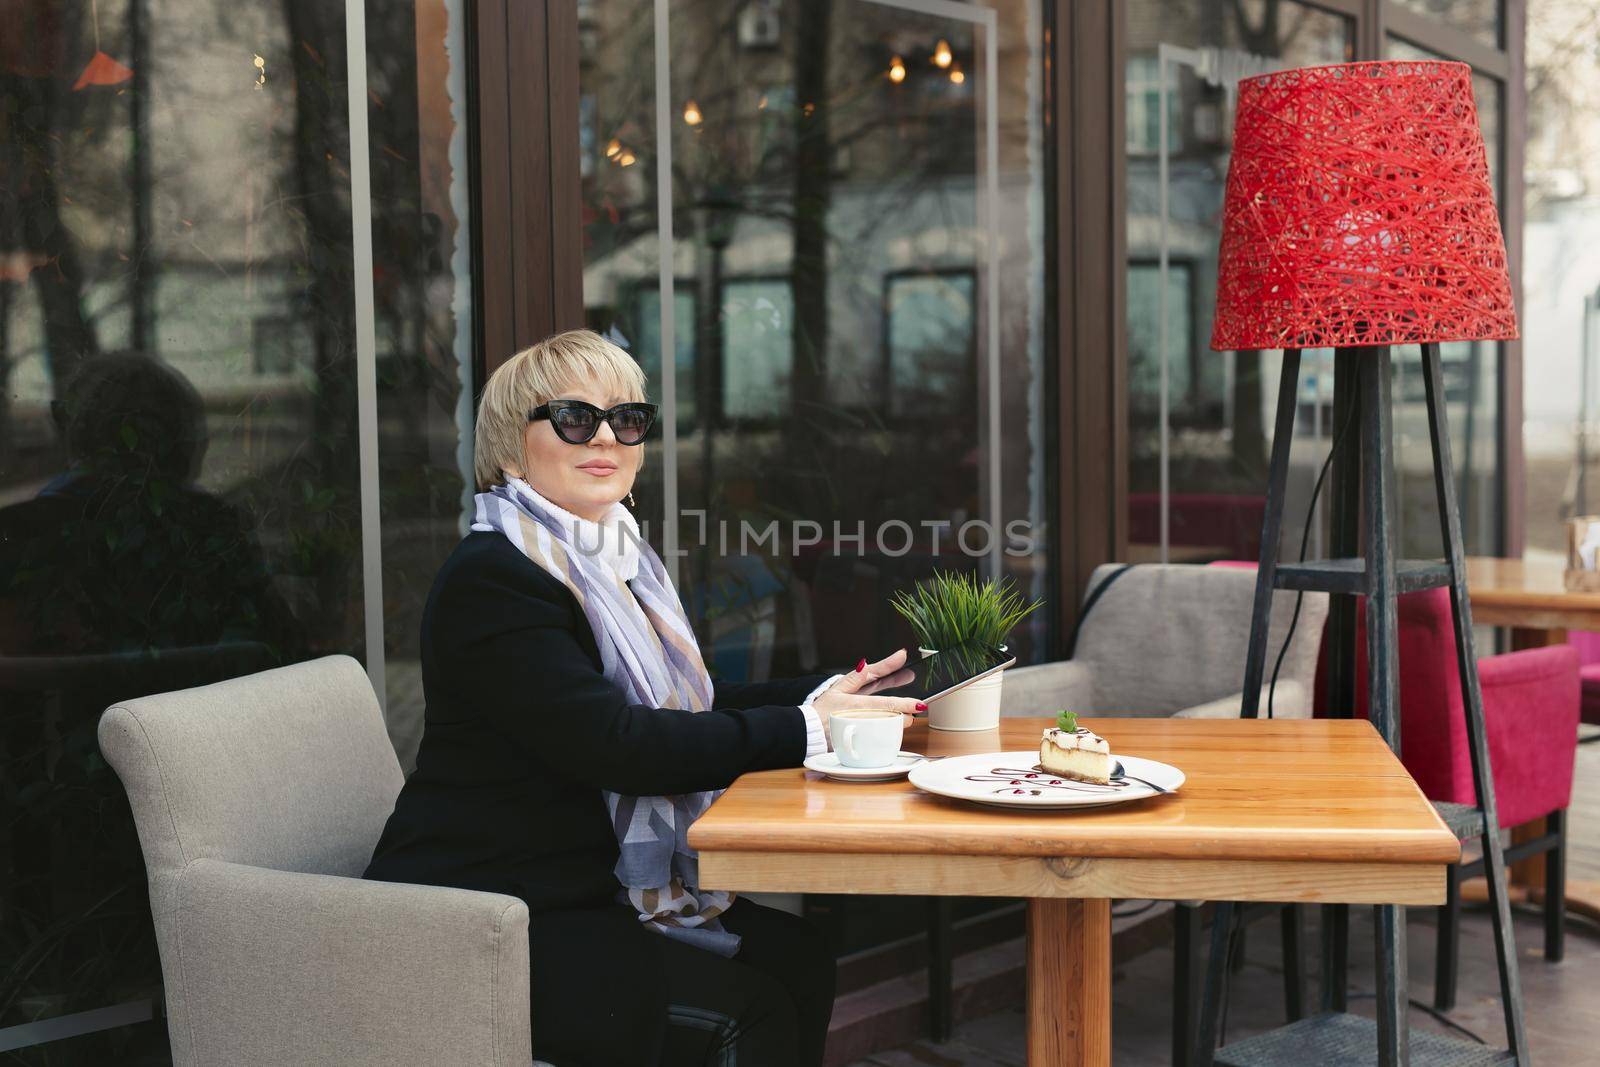 An elderly woman in black glasses works on a tablet in a cafe on the street during lunch.